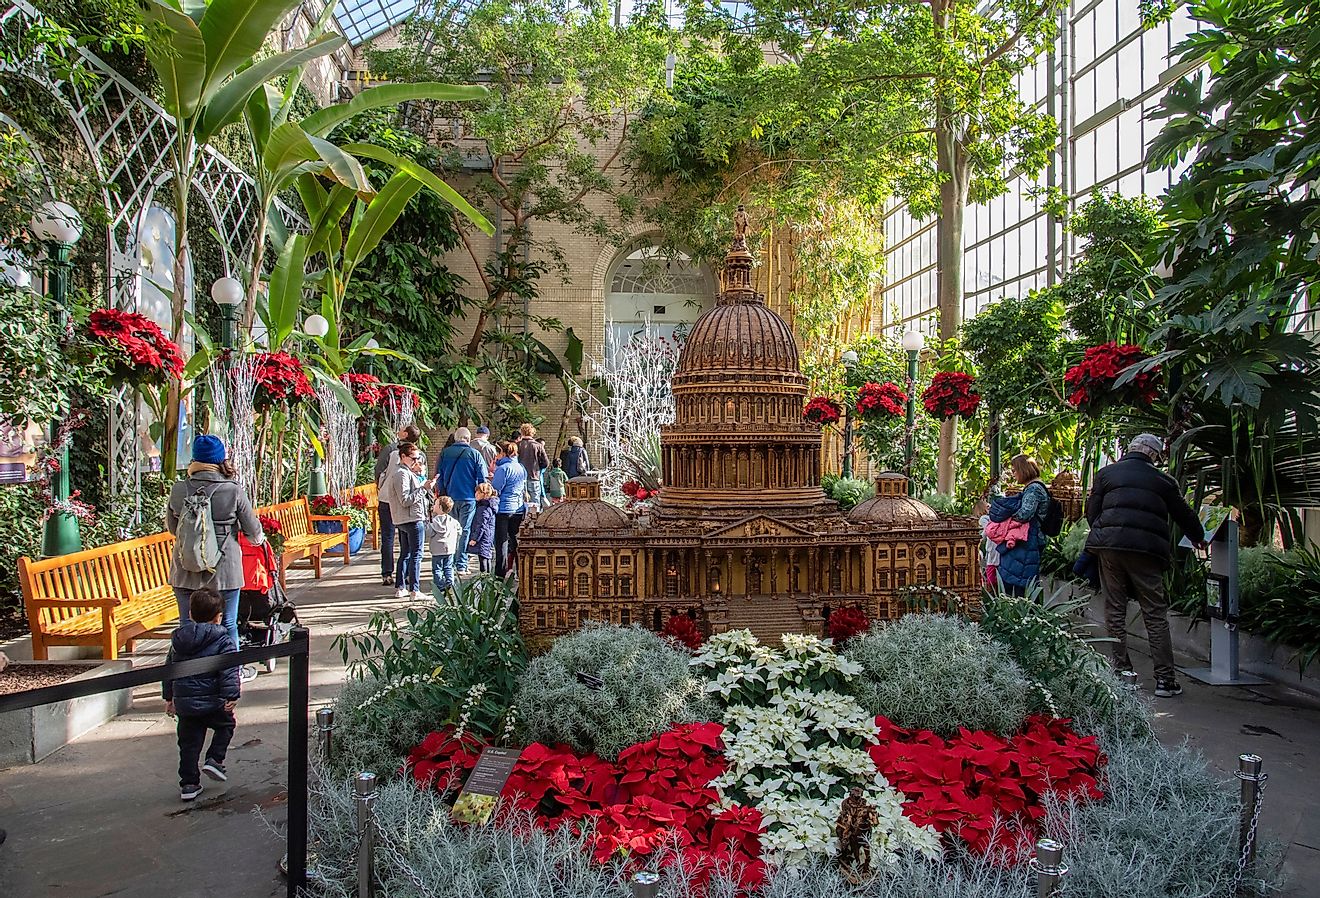 Holiday decor at the United States Botanic Garden Image credit TJ Brown via Shutterstock